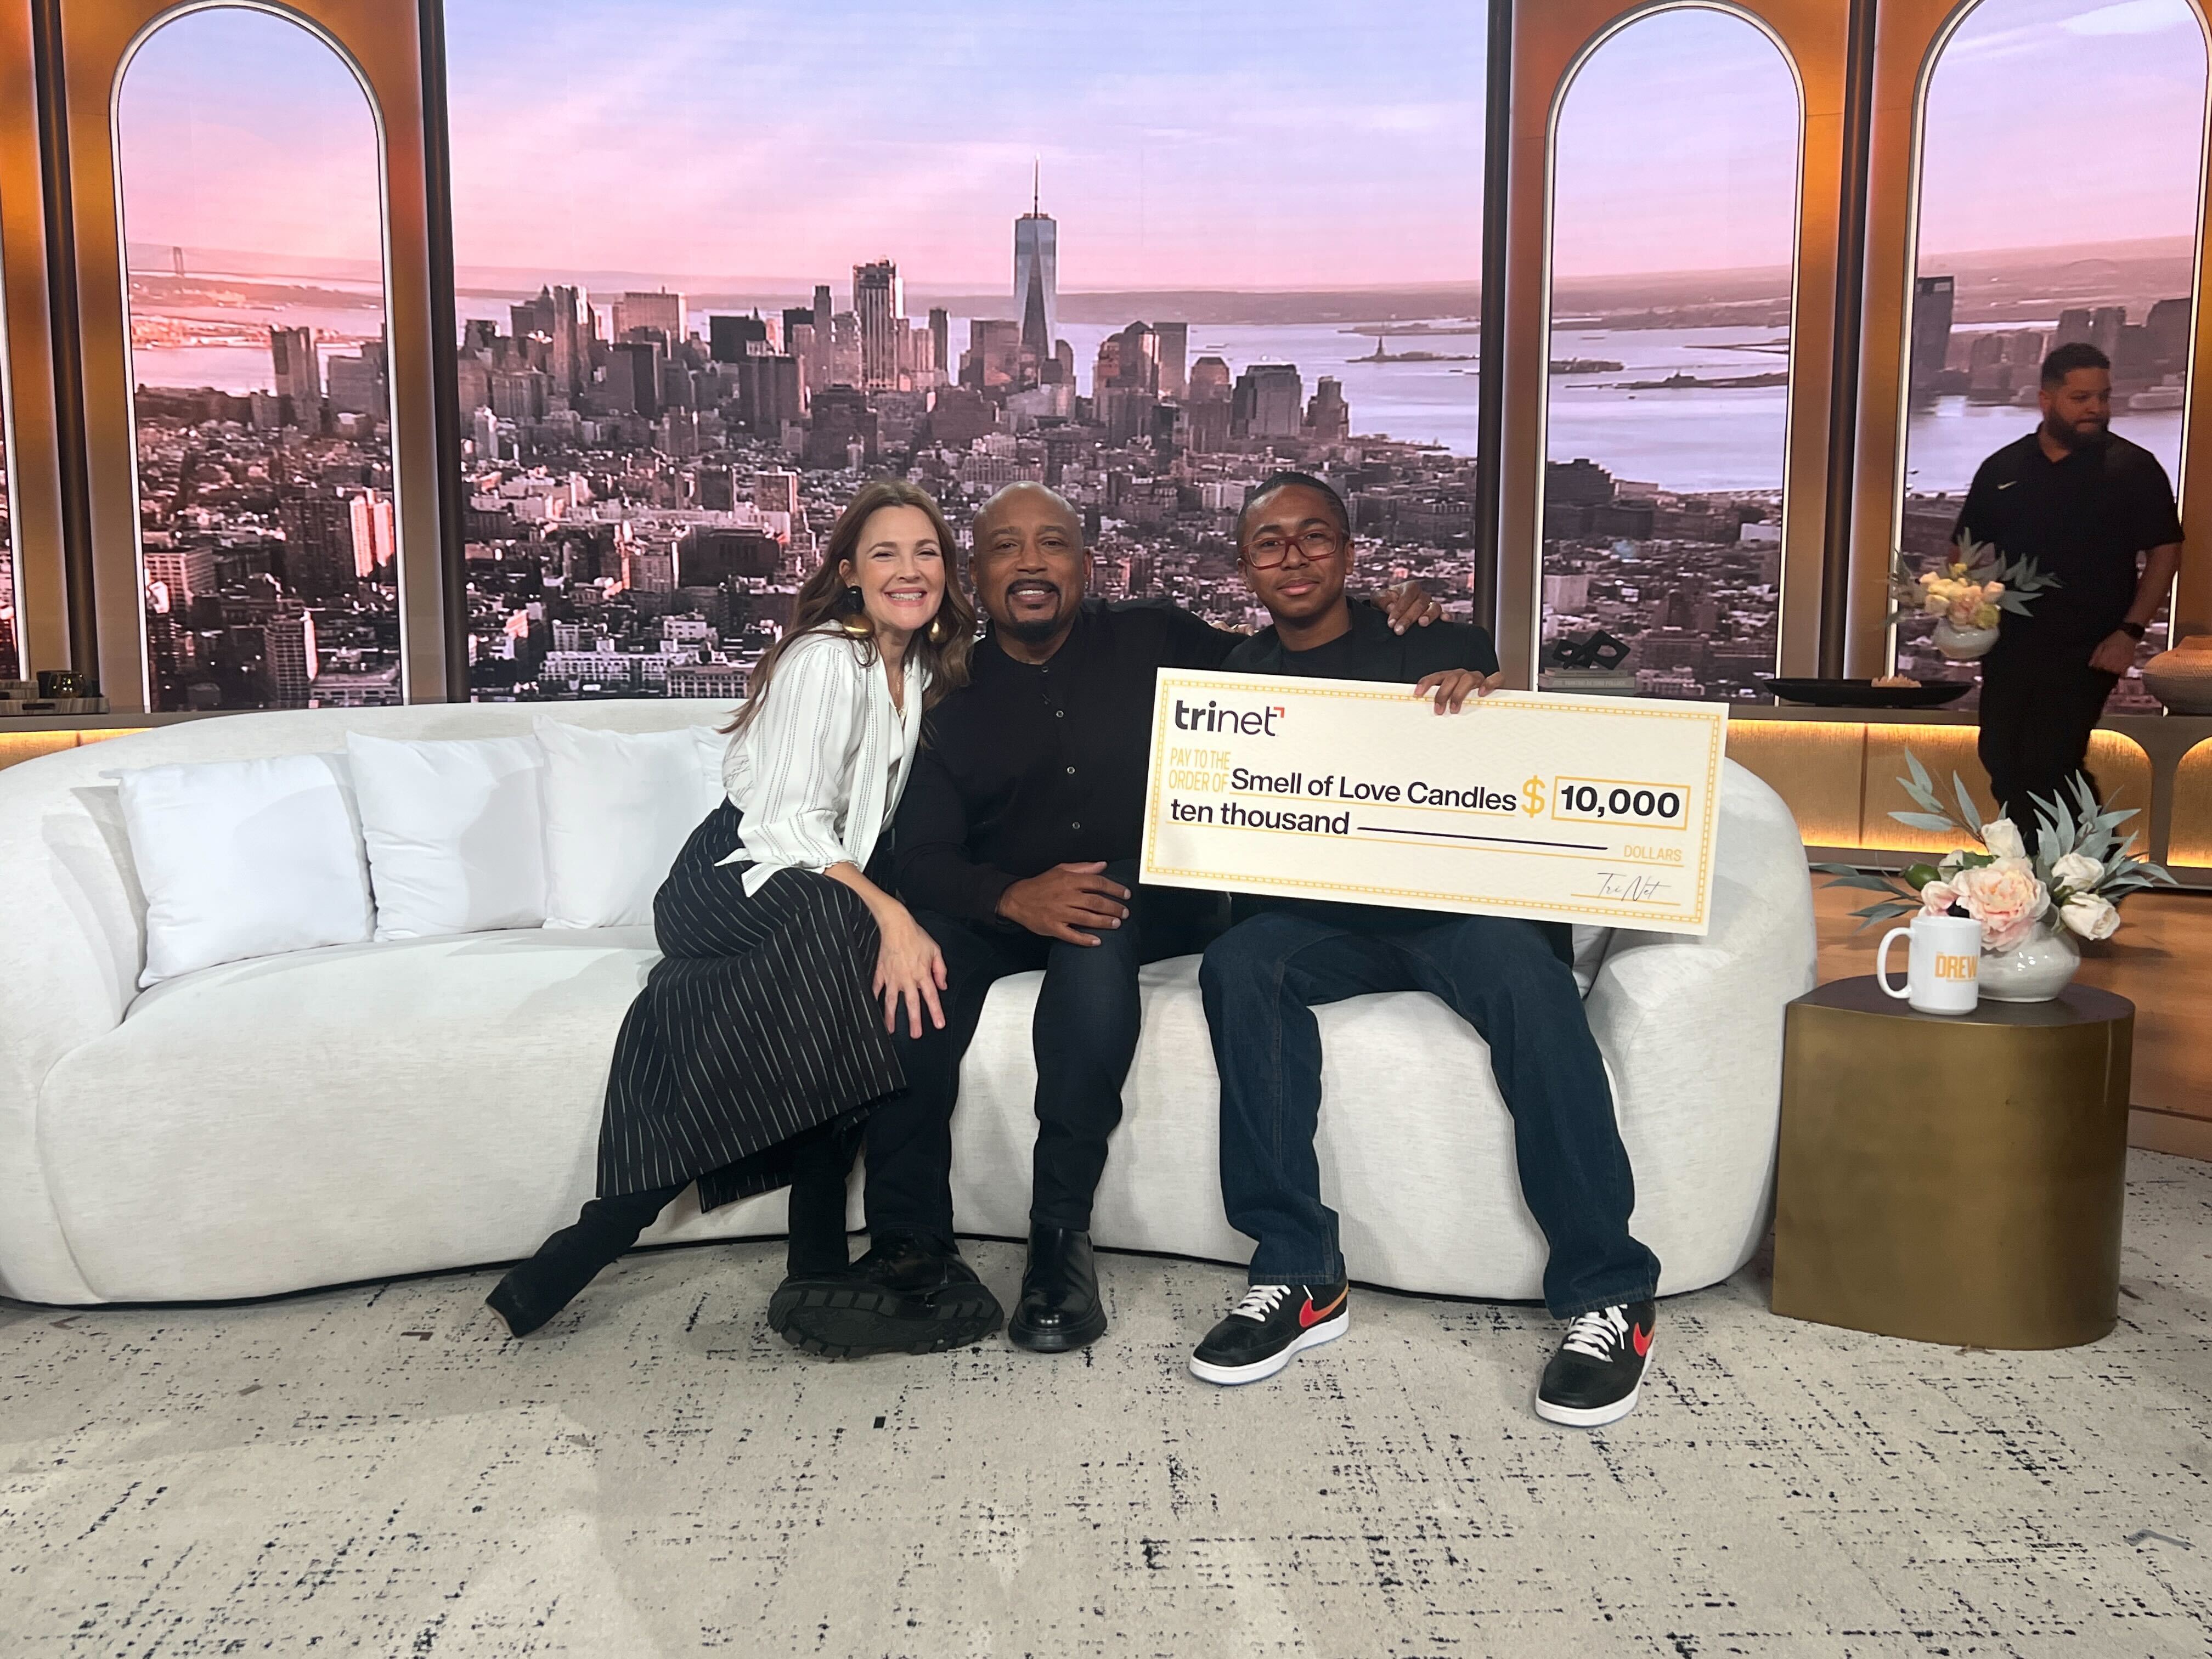 We were featured on The Drew Barrymore Show with Daymond John!